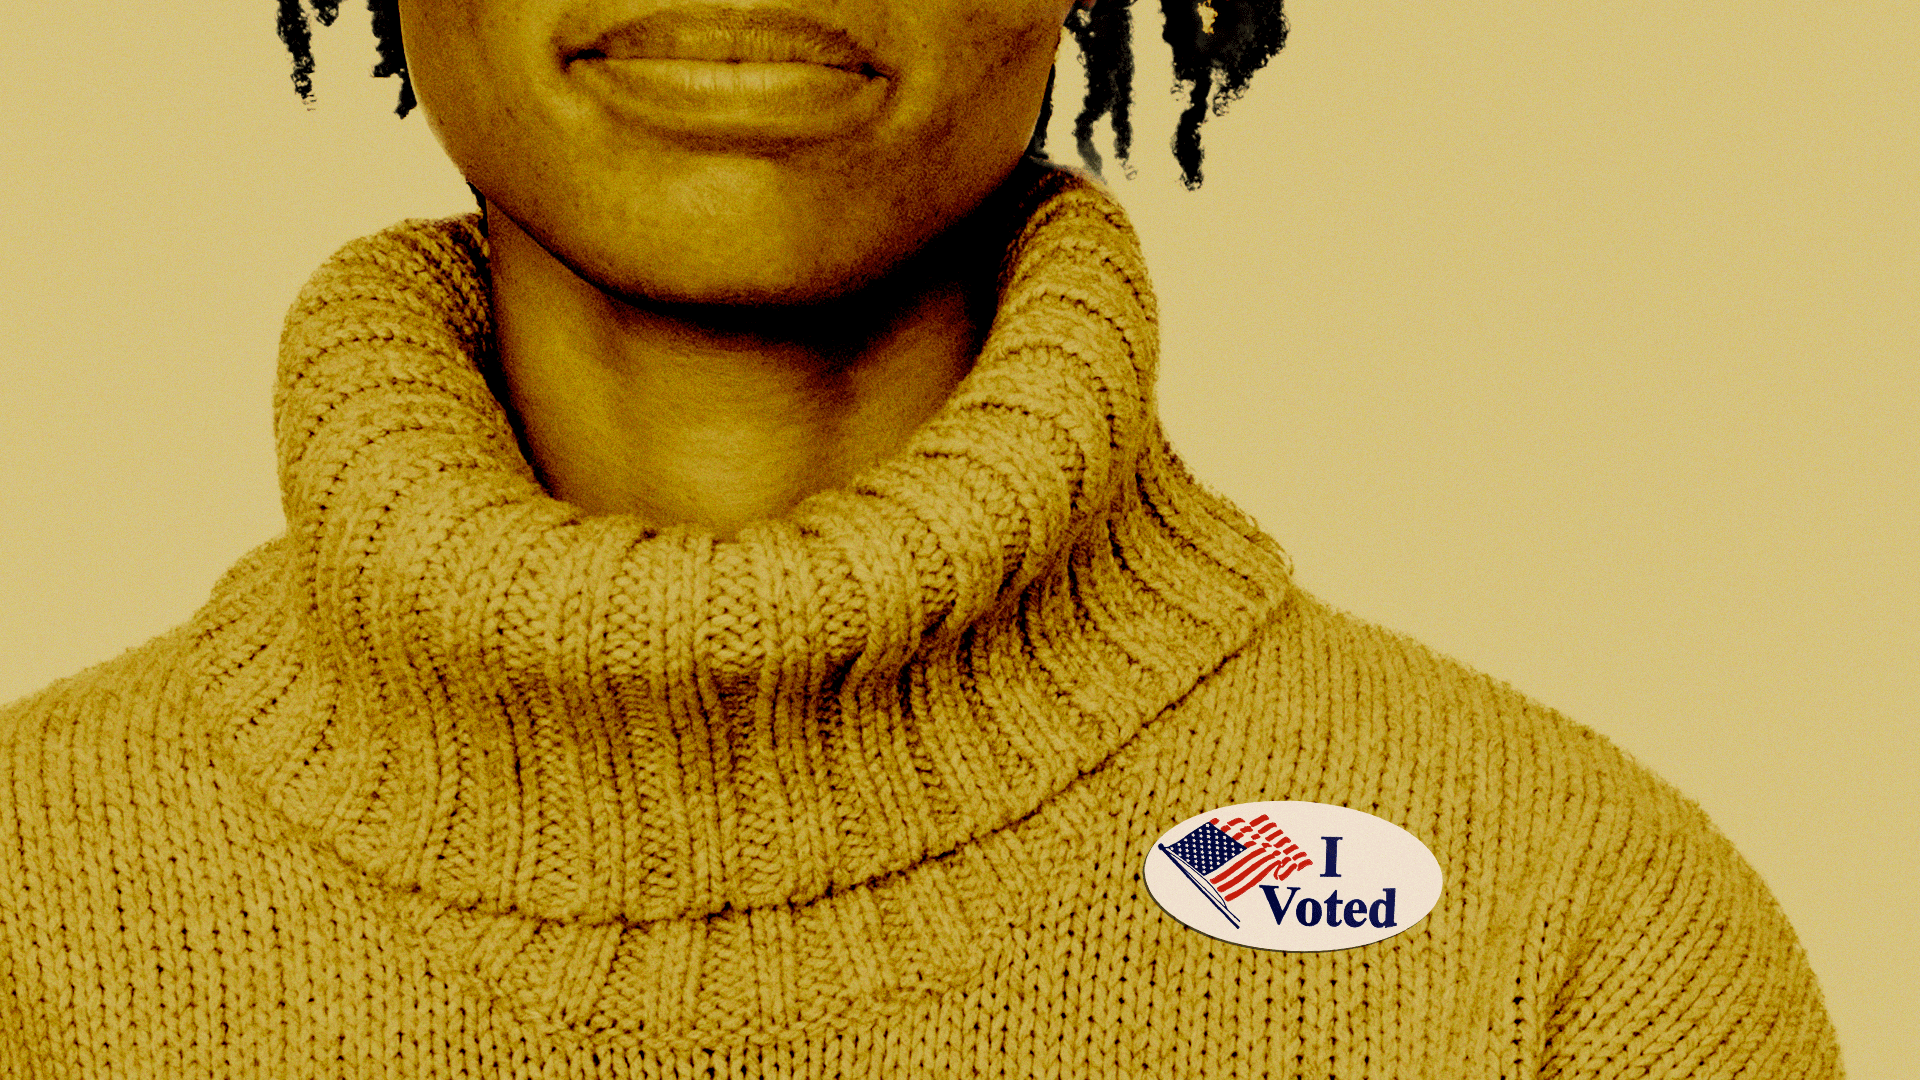 Animated illustration of three different people wearing an "I Voted" sticker.